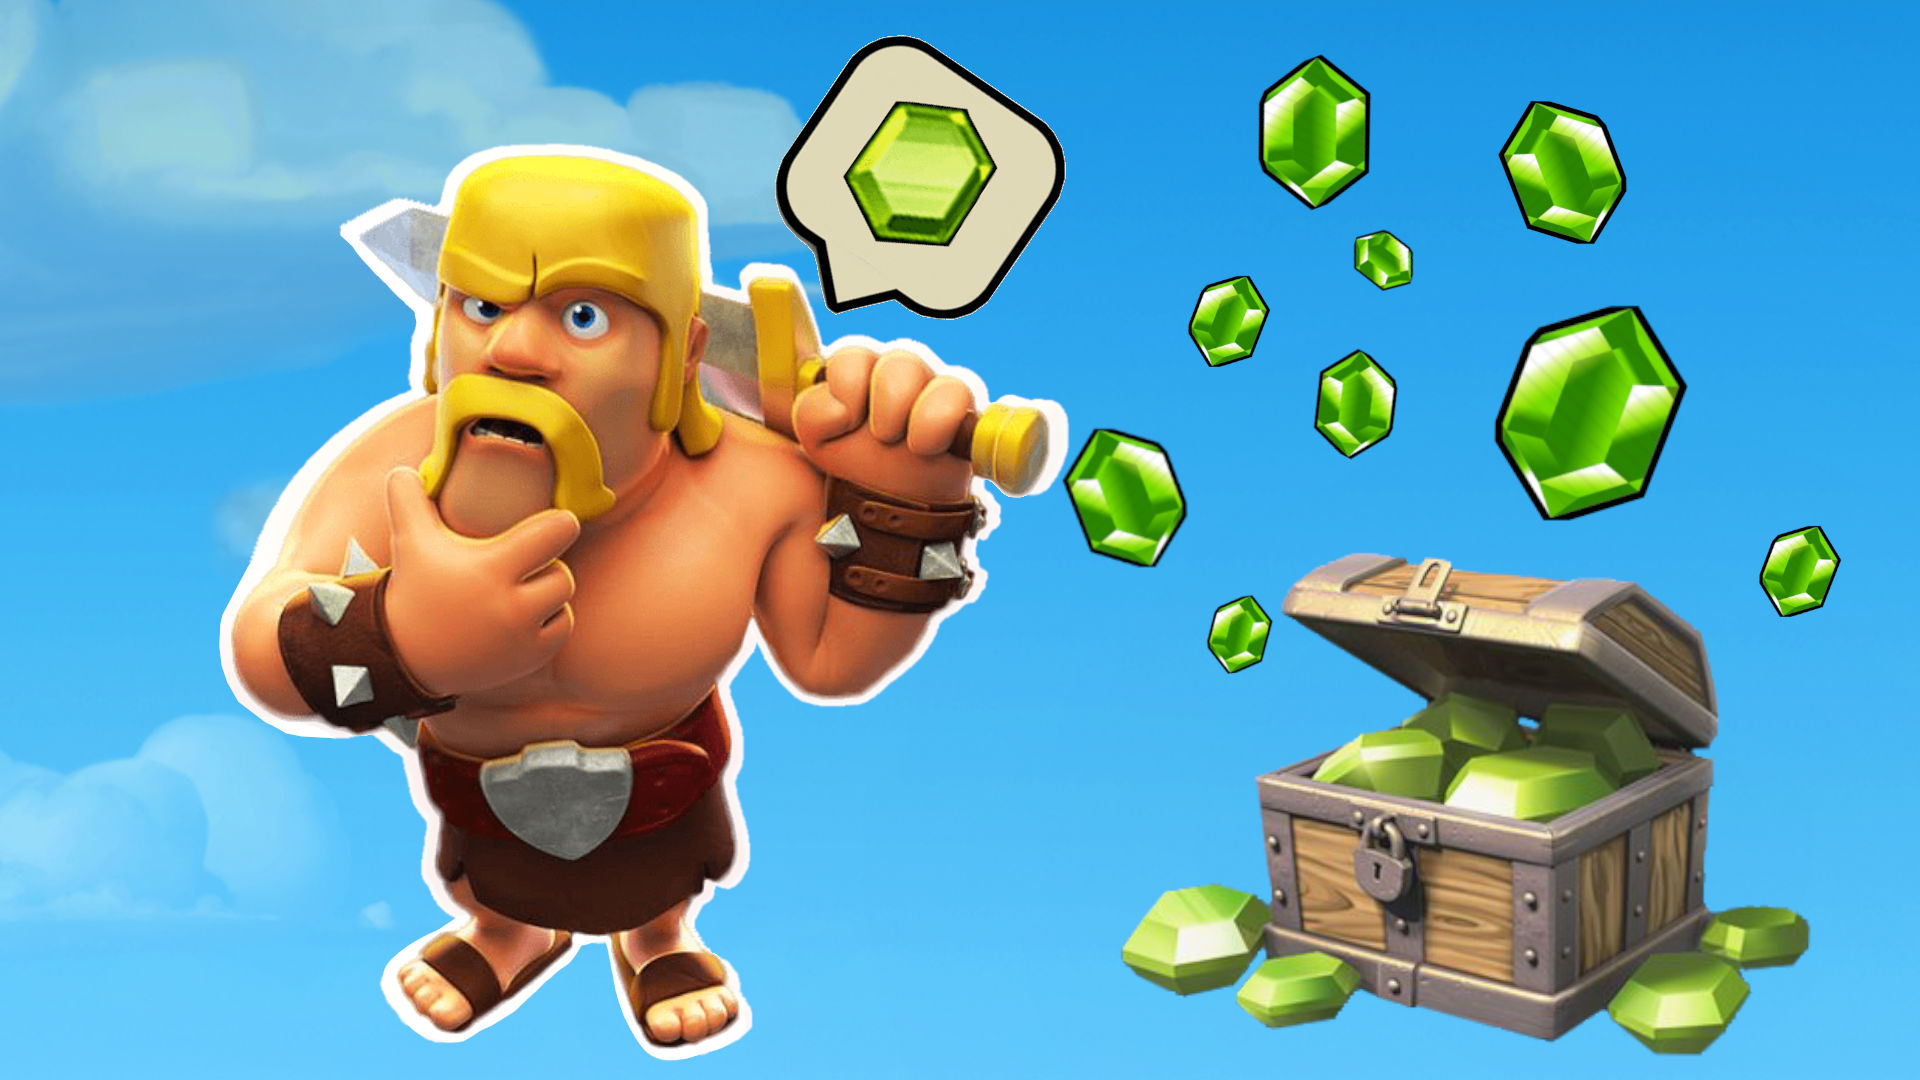 Cheats Tips For Clash Of Kings APK + Mod for Android.